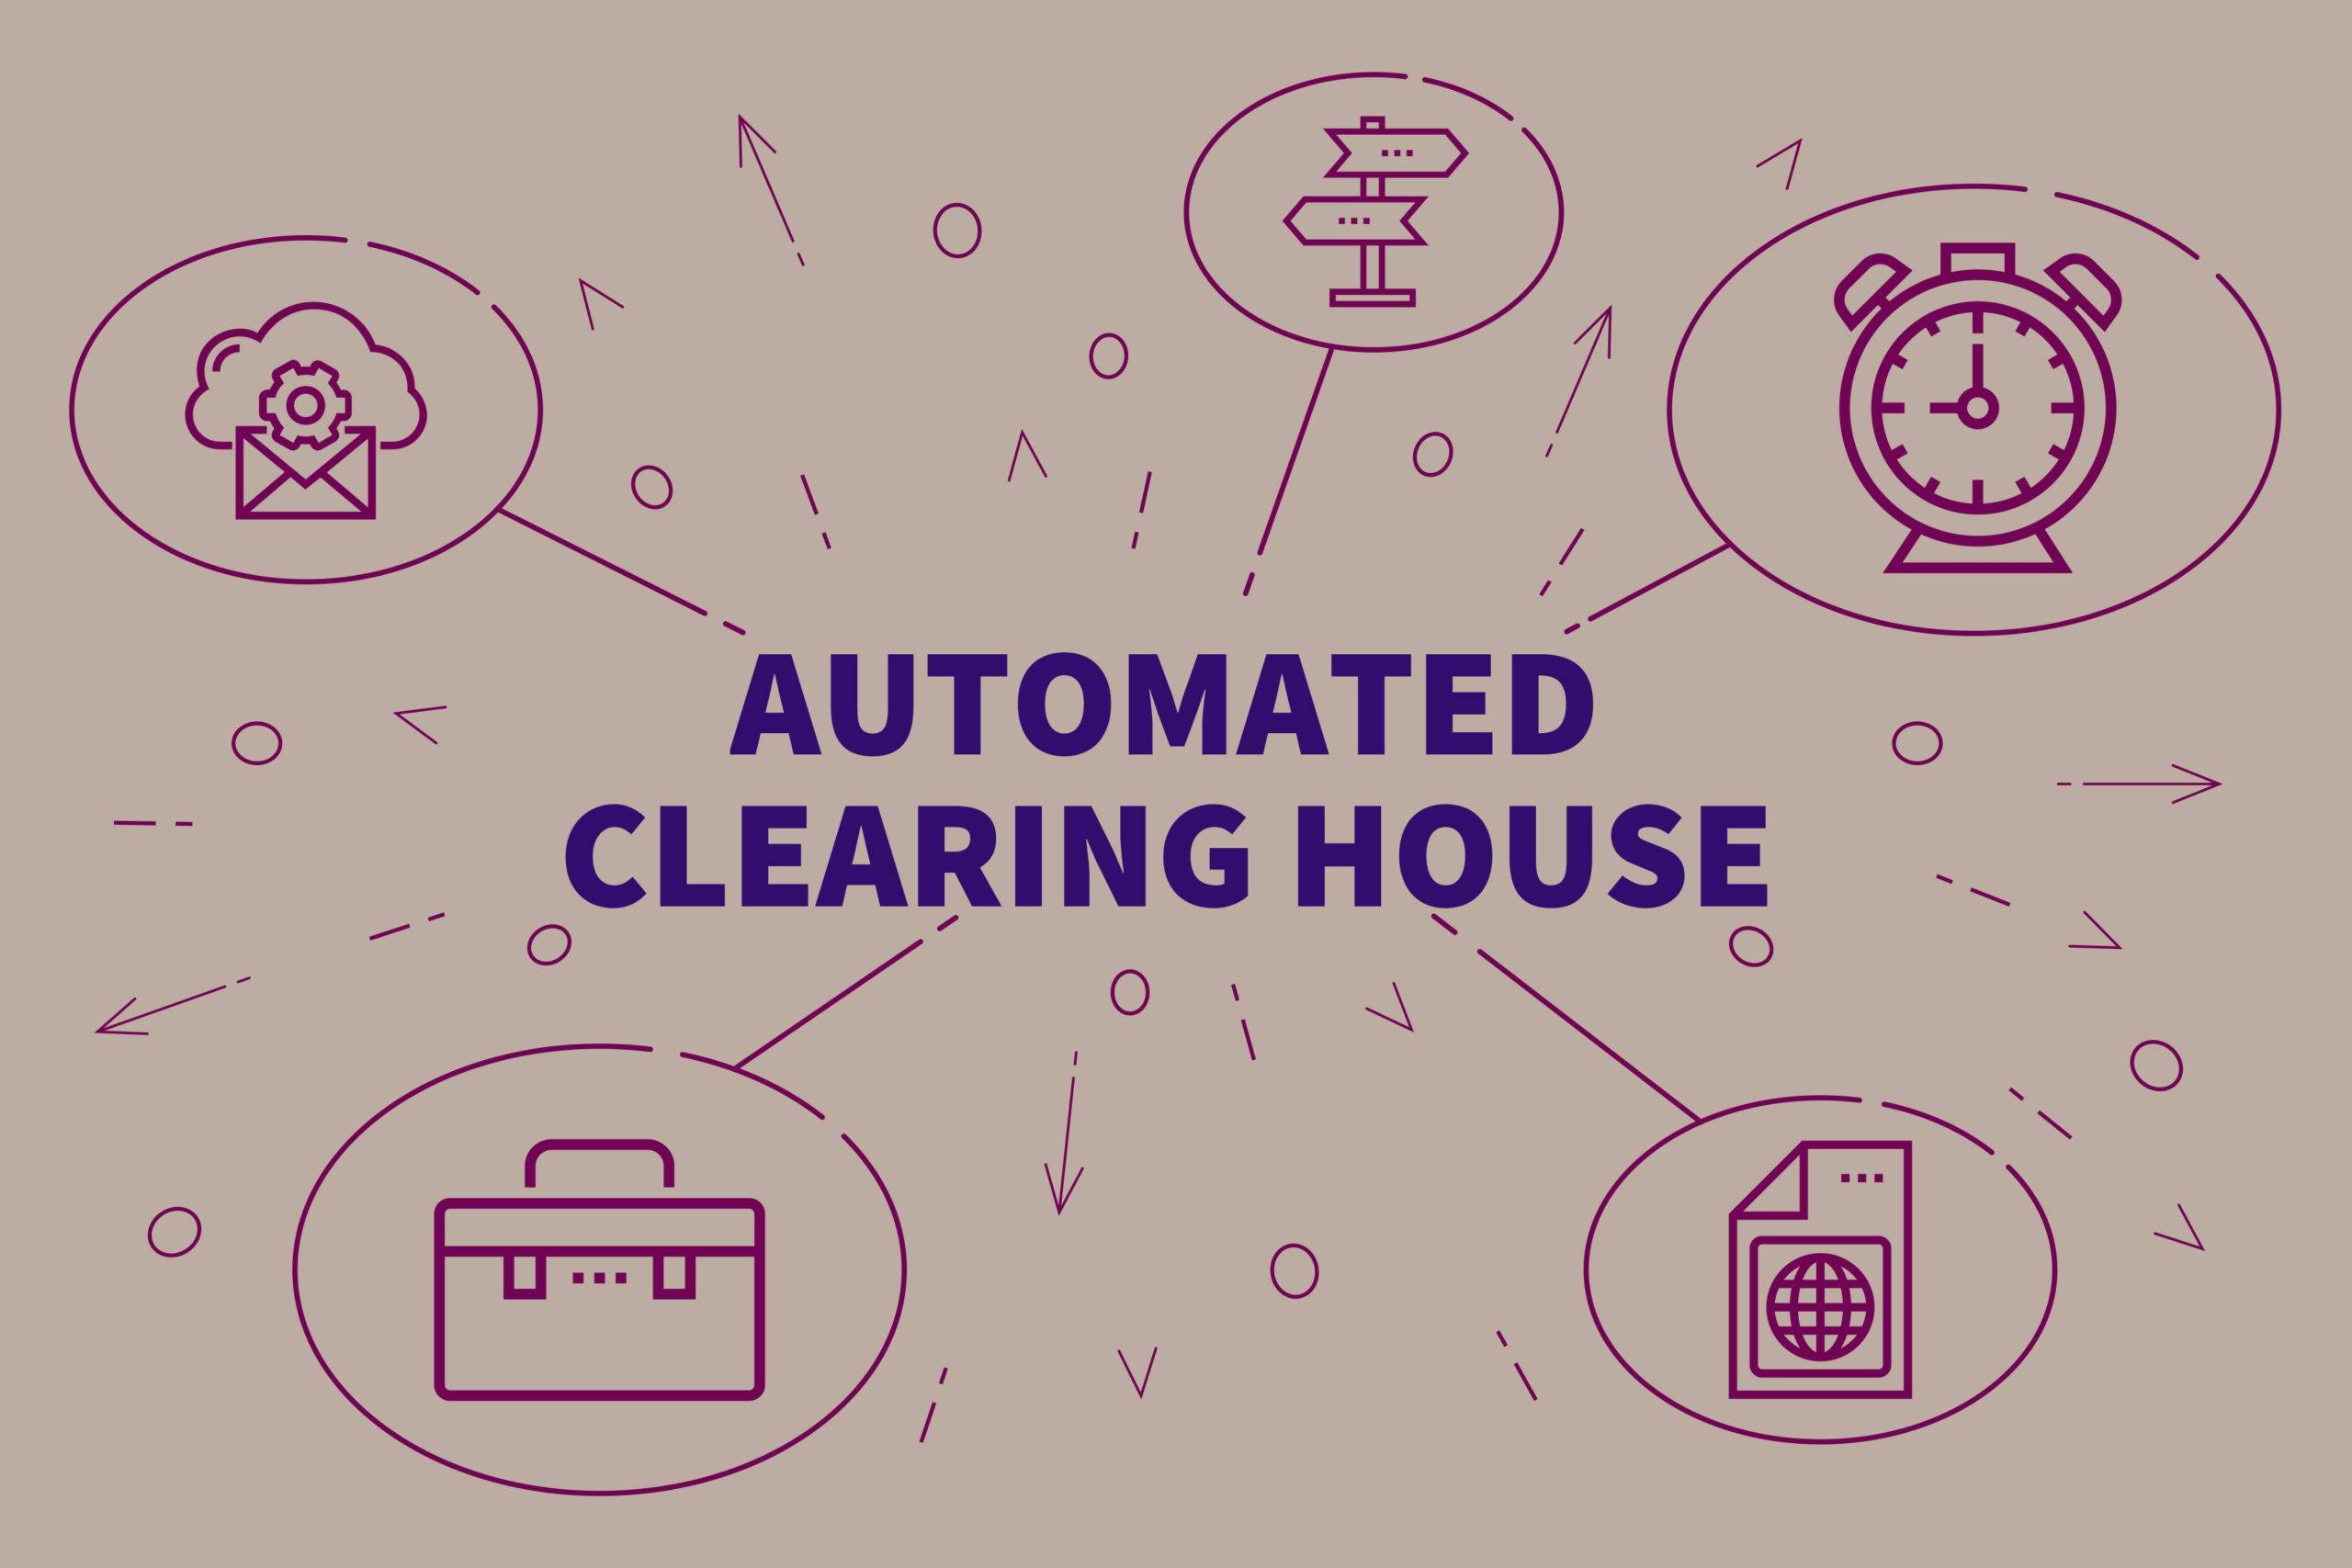 Understanding the Automated Clearing House (ACH)